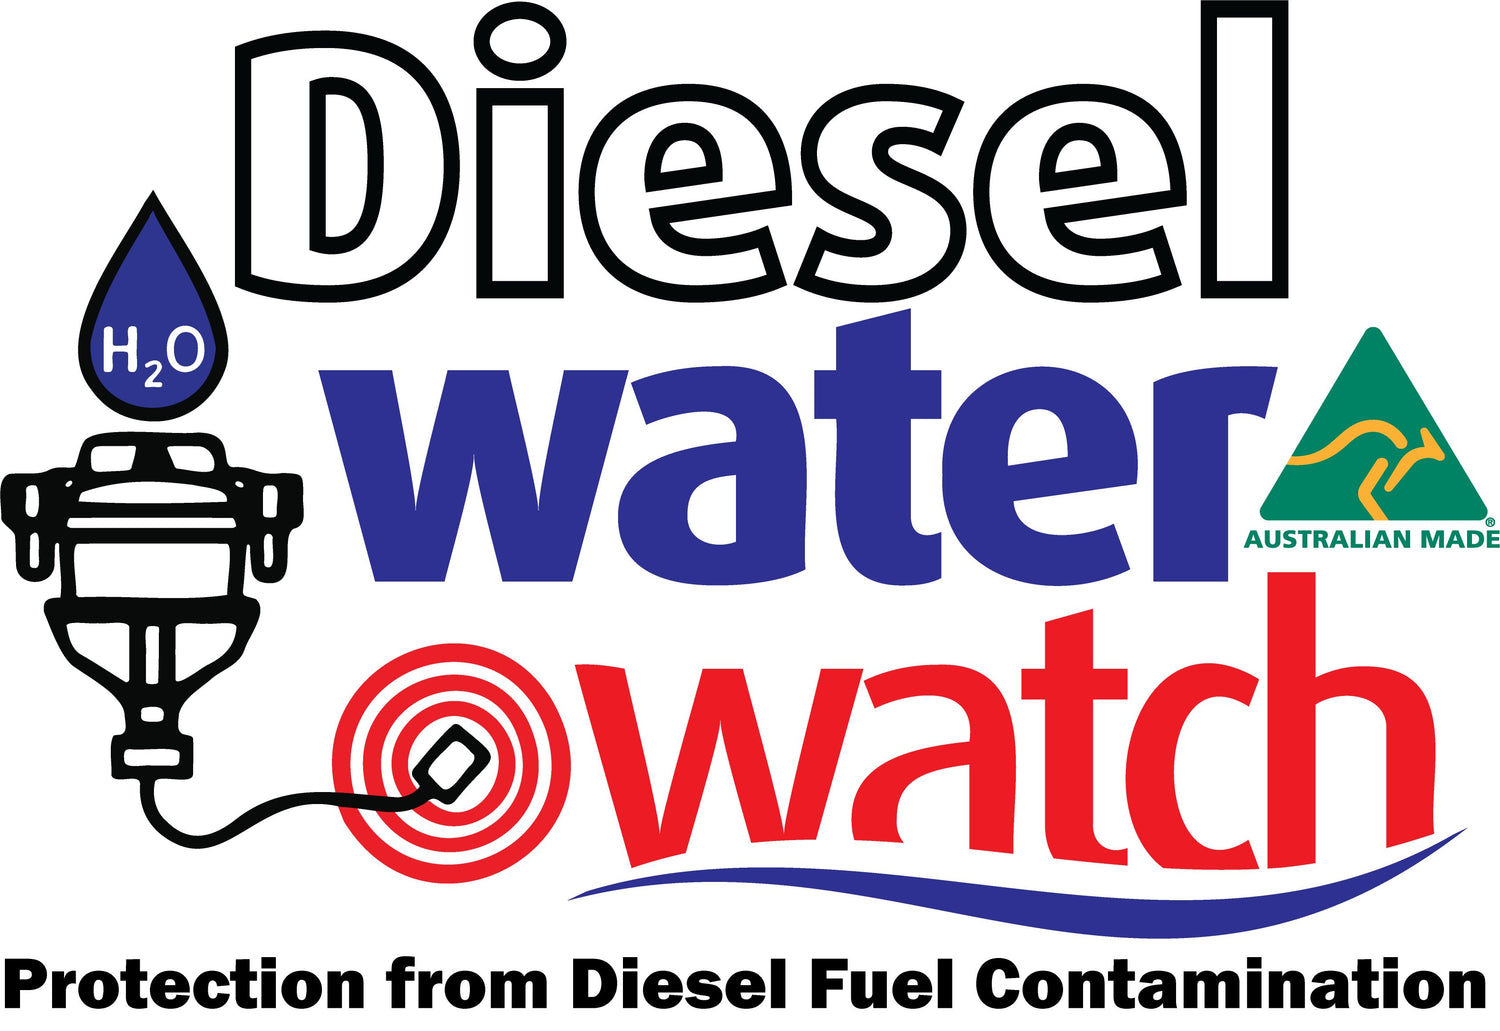 Diesel Water Watch is the only electronically operated diesel fuel contamination trap, Water Watch was invented in Australia for modern common rail diesels